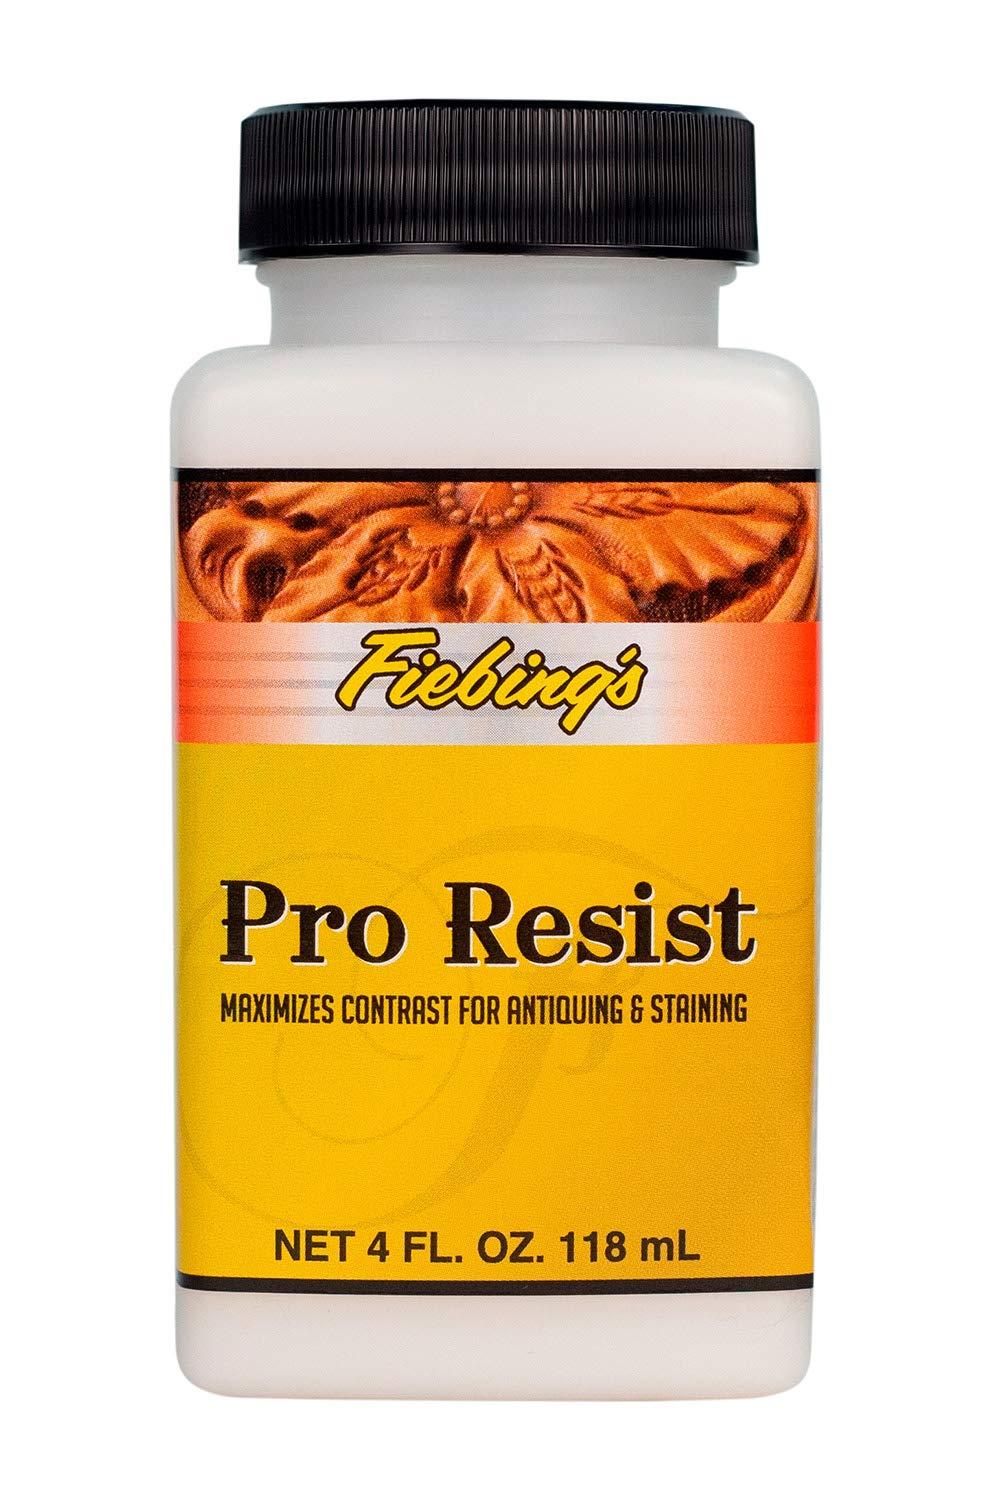 Fiebing's Pro Resist (4 oz) - Maximize Contrast for Antiquing, Staining, Dyeing Leather - Top Finish Resists Moisture, Sun & Dirt - Seal & Protect All Leathercraft, Car, Couch, Furniture, Purses, Boot